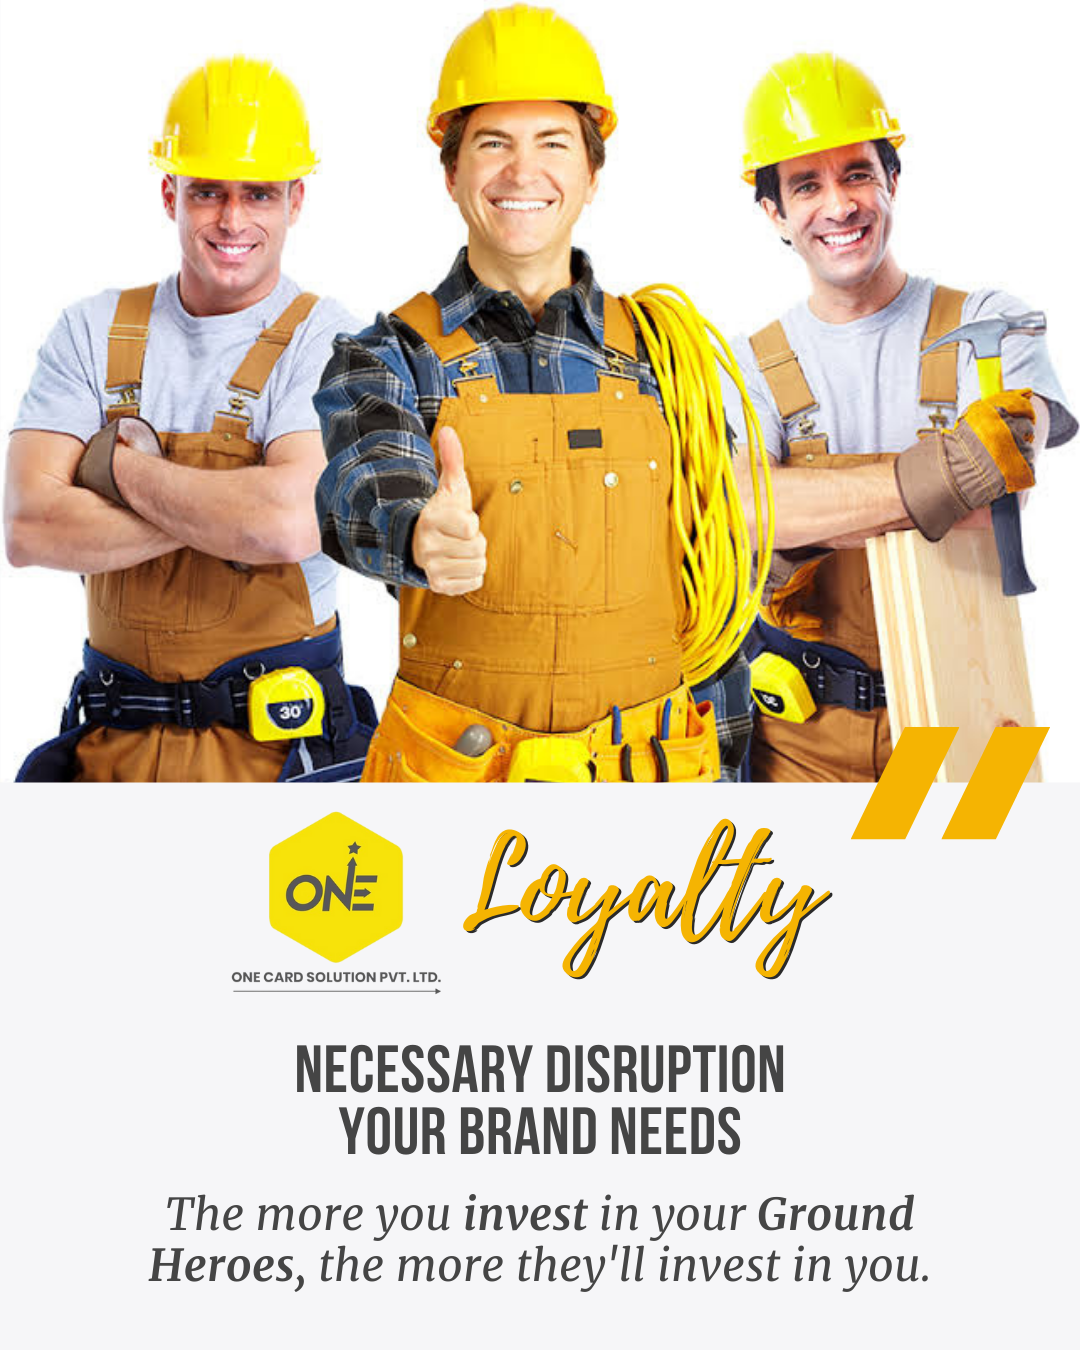 Loyalty is the Necessary Disruption your Brand Needs